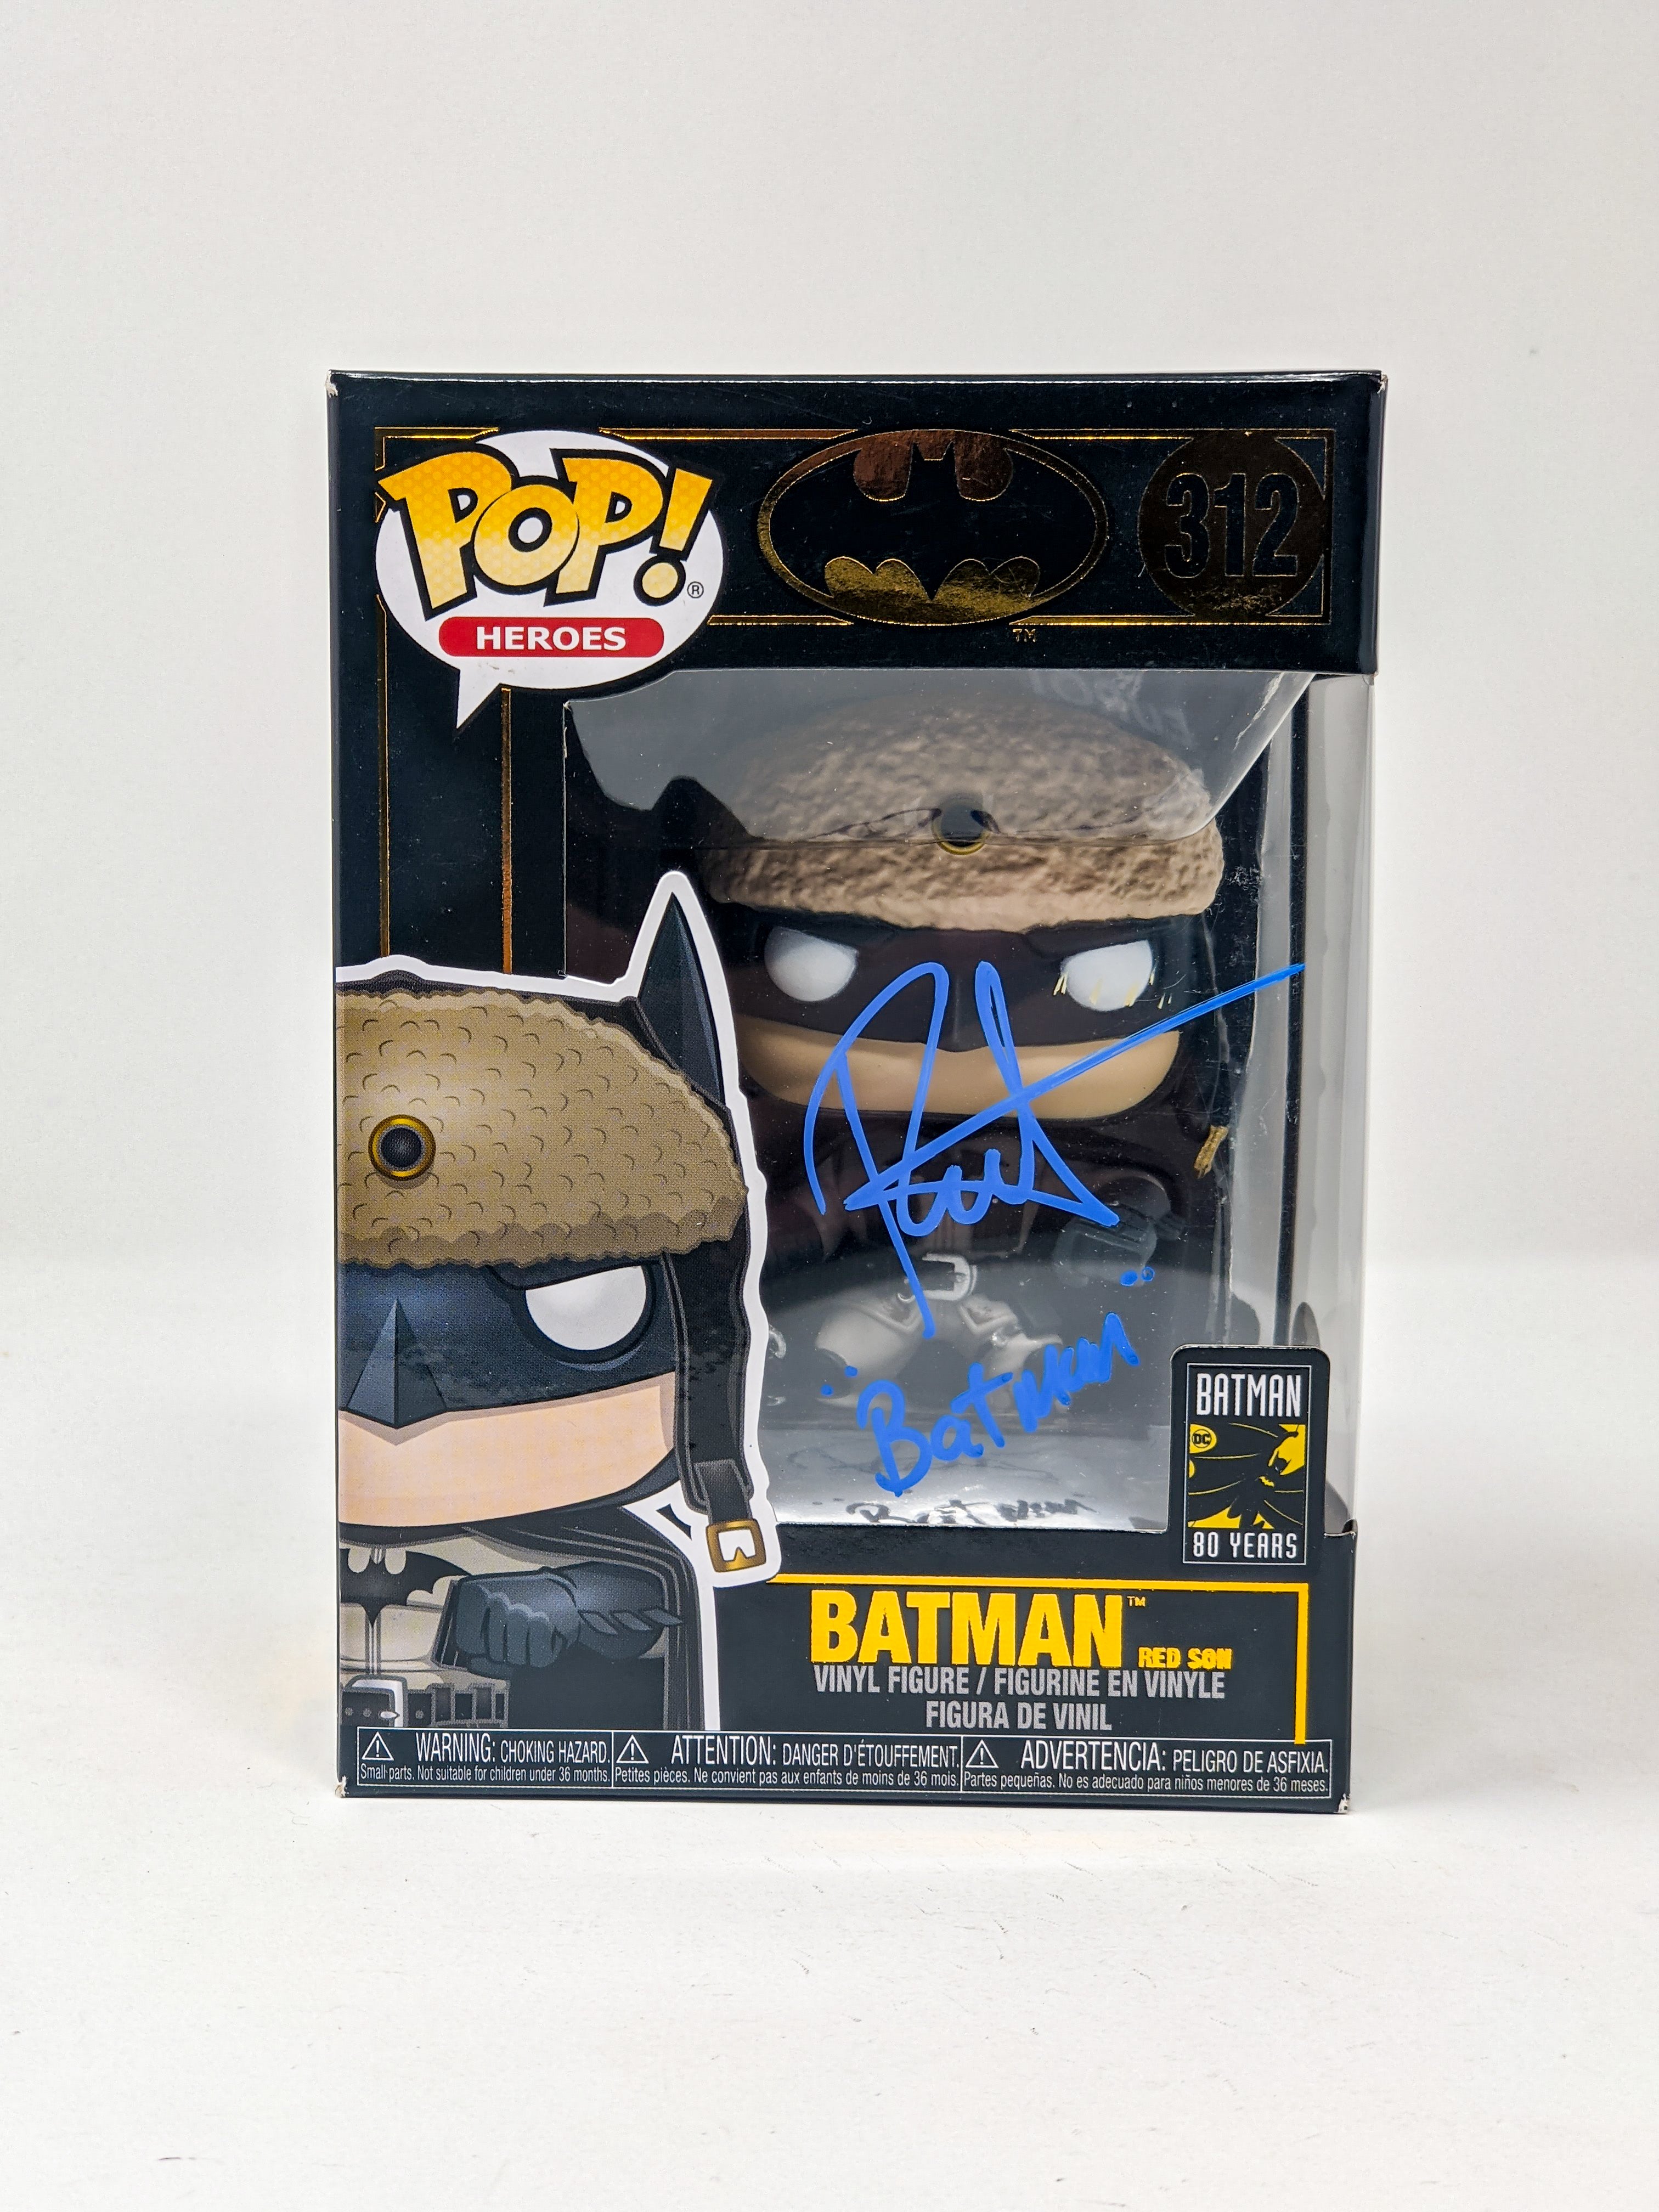 Roger Craig Smith DC Batman Red Son #312 Exclusive Signed Funko Pop JSA Certified Autograph GalaxyCon